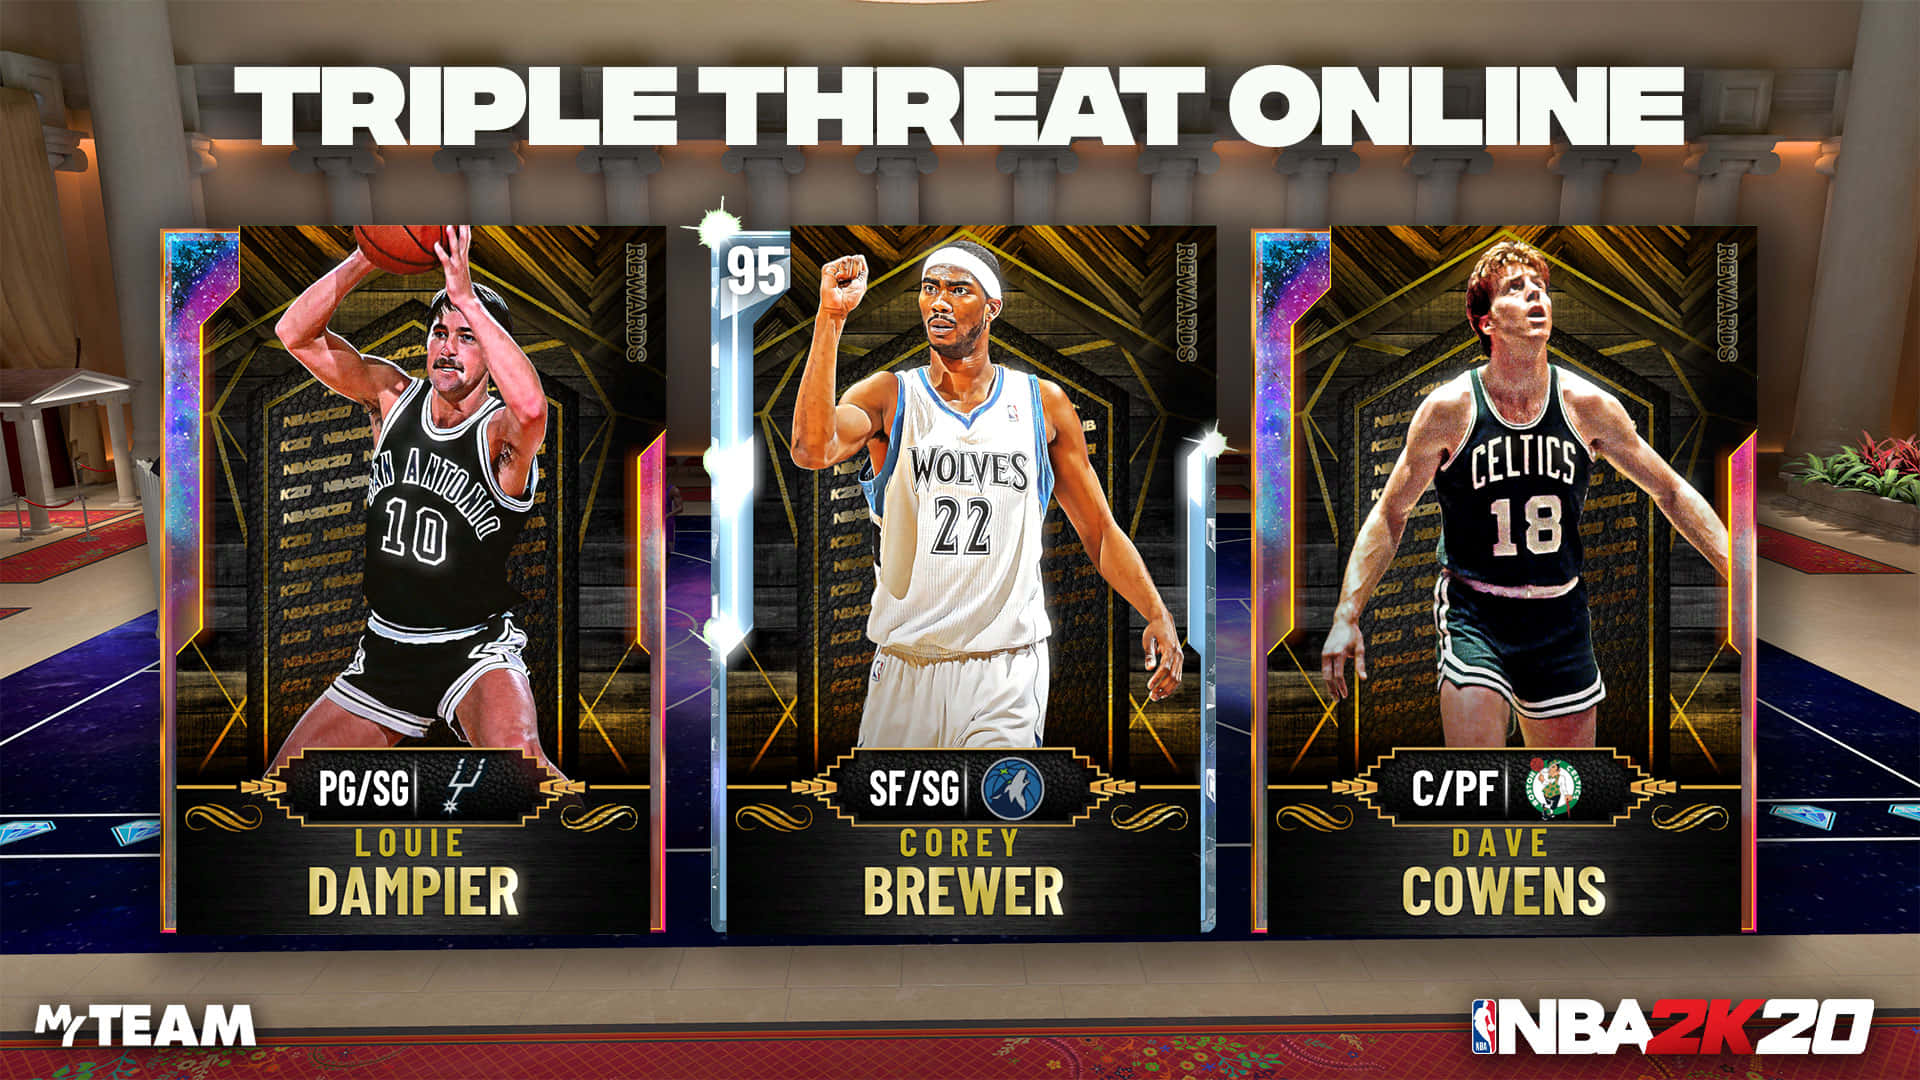 Dave Cowens In Triple Threat Online Picture